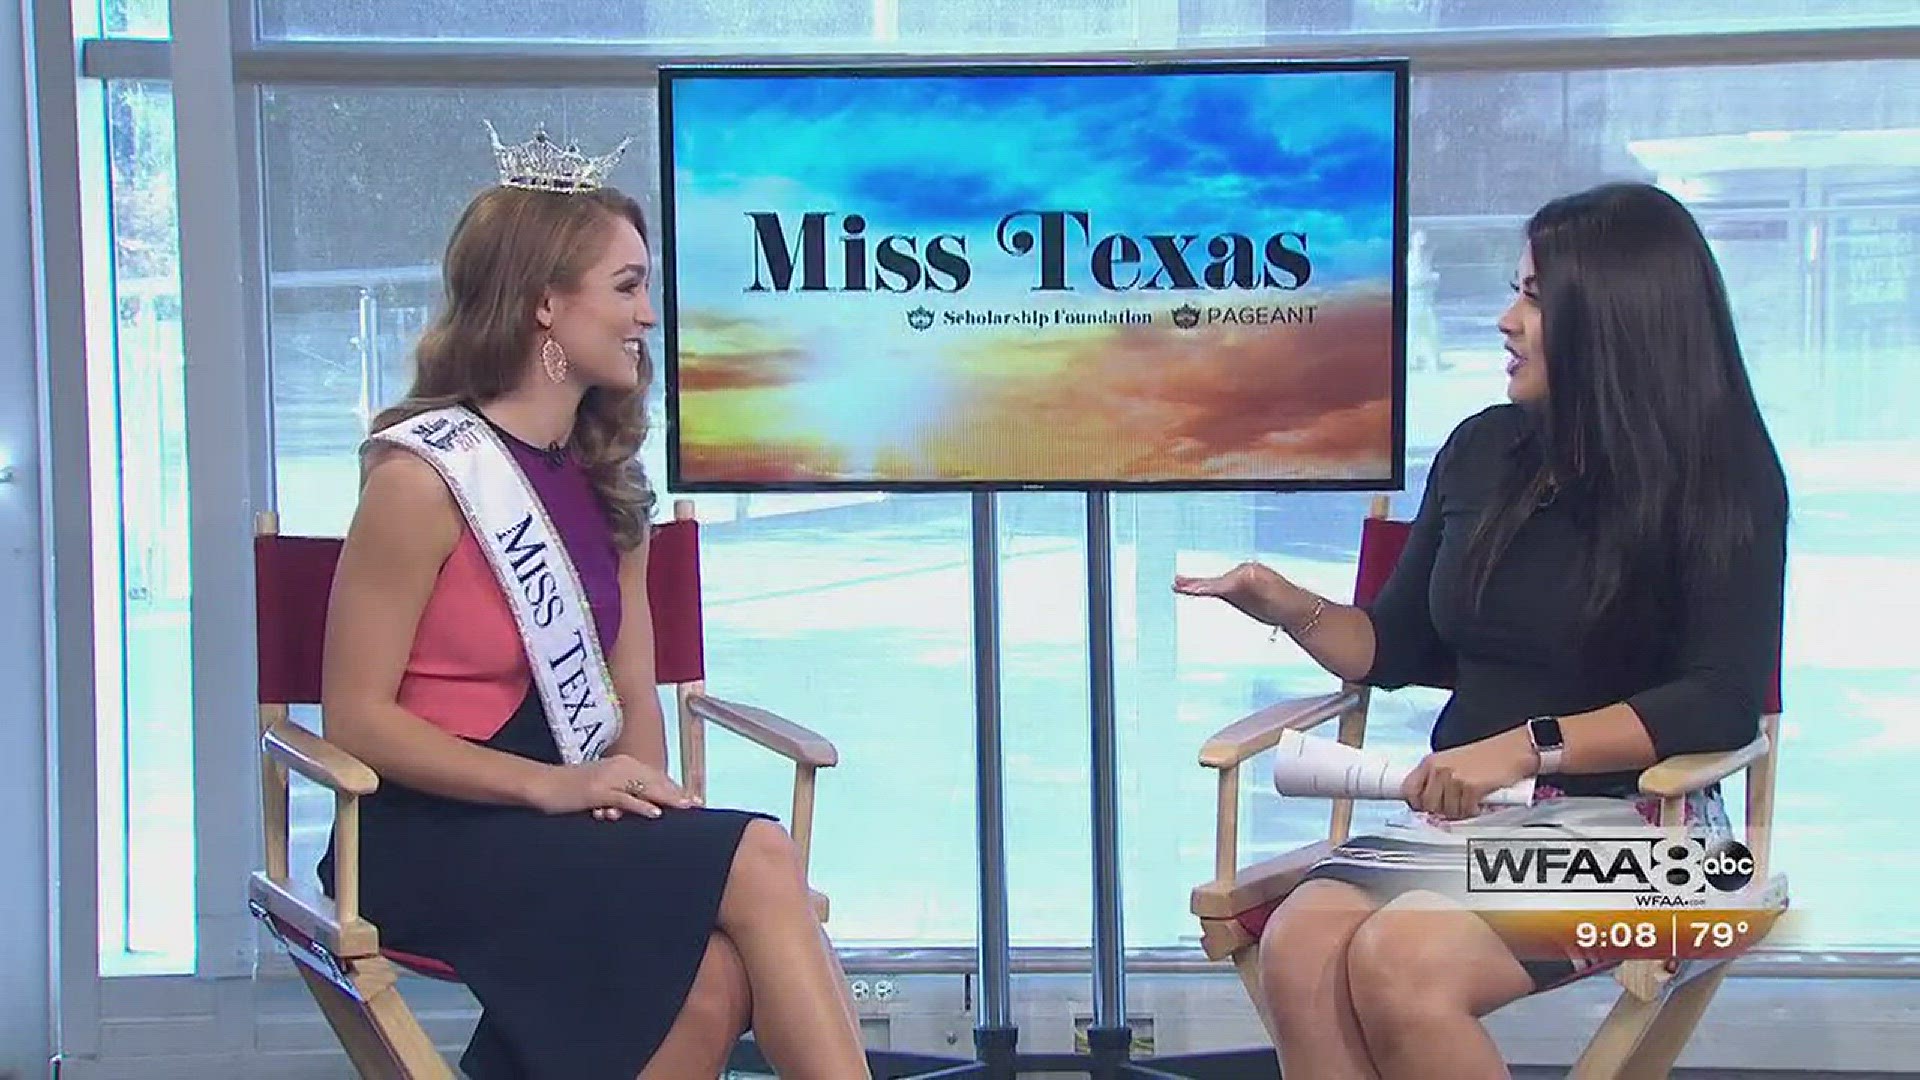 Go to facebook.com/missamerica texas to send your well wishes.